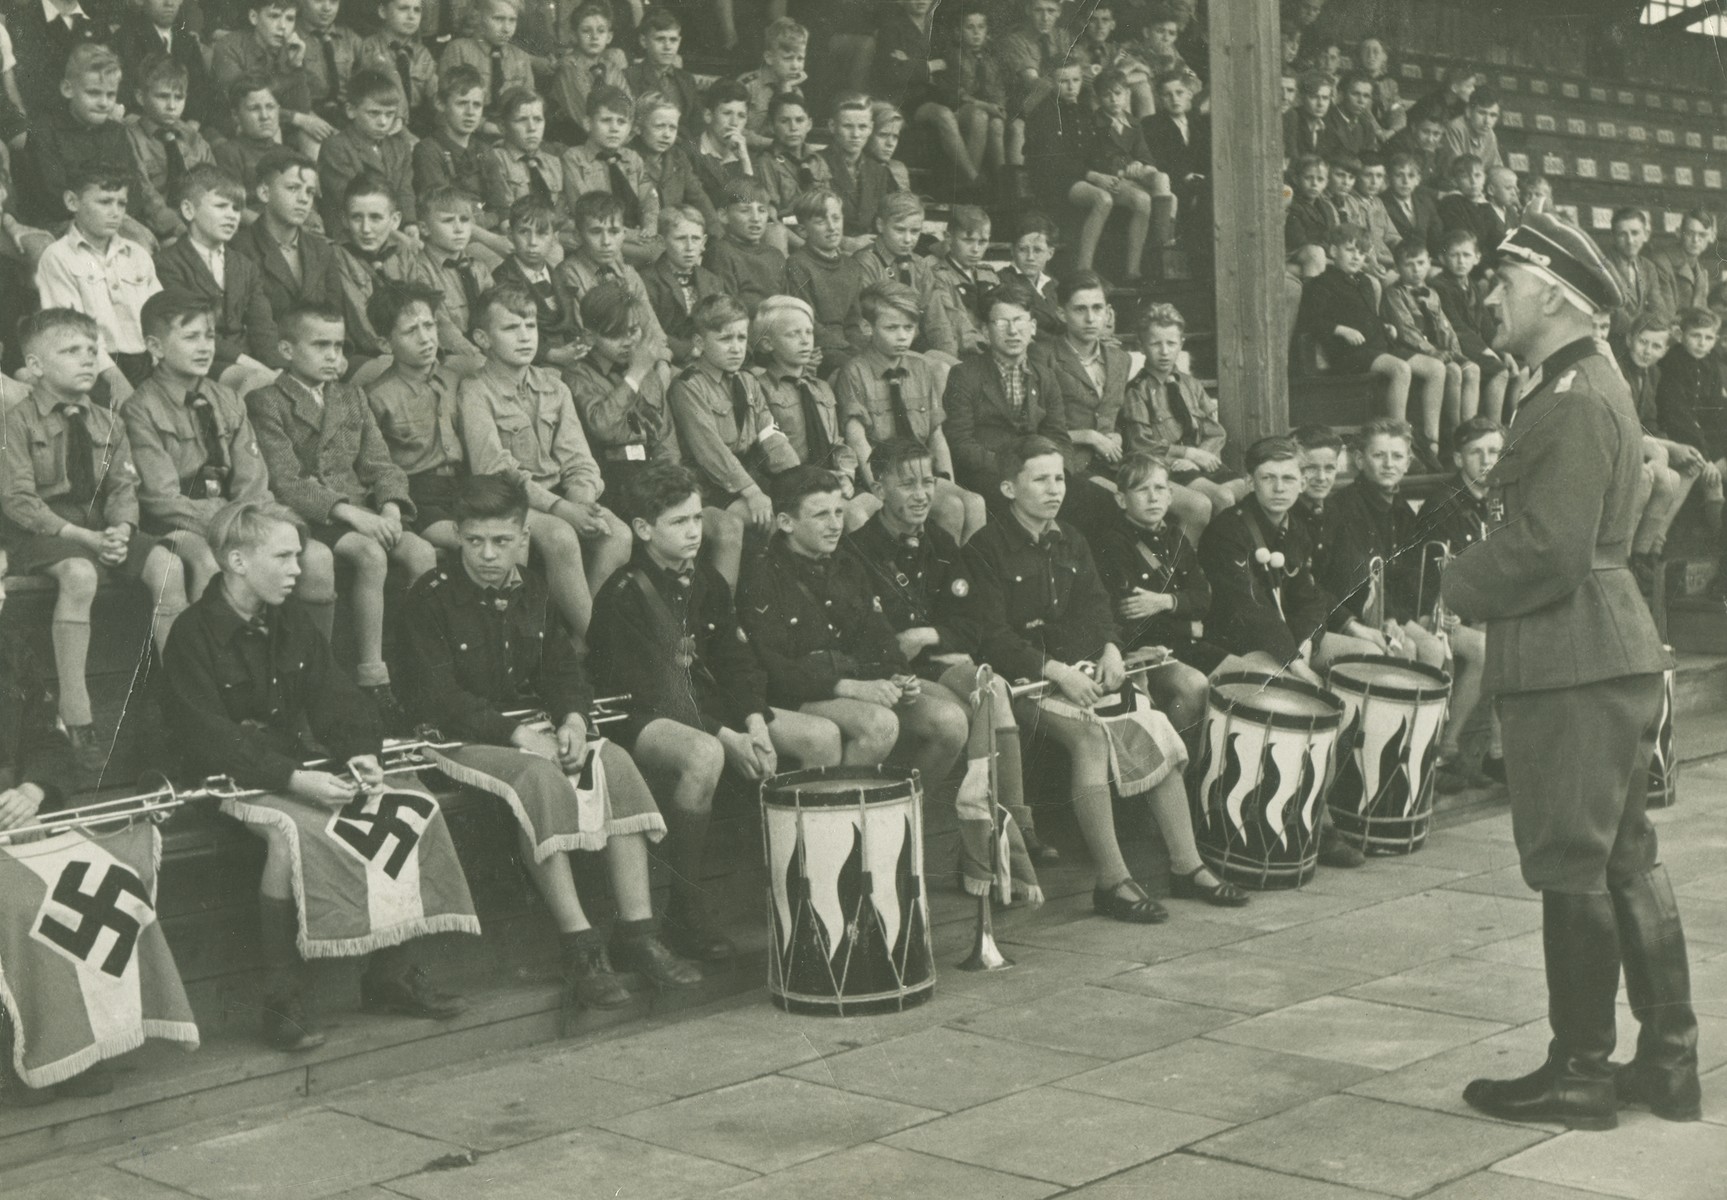 Young members of the Hitler Youth sit in a stadium behind a row of buglers and drummers.